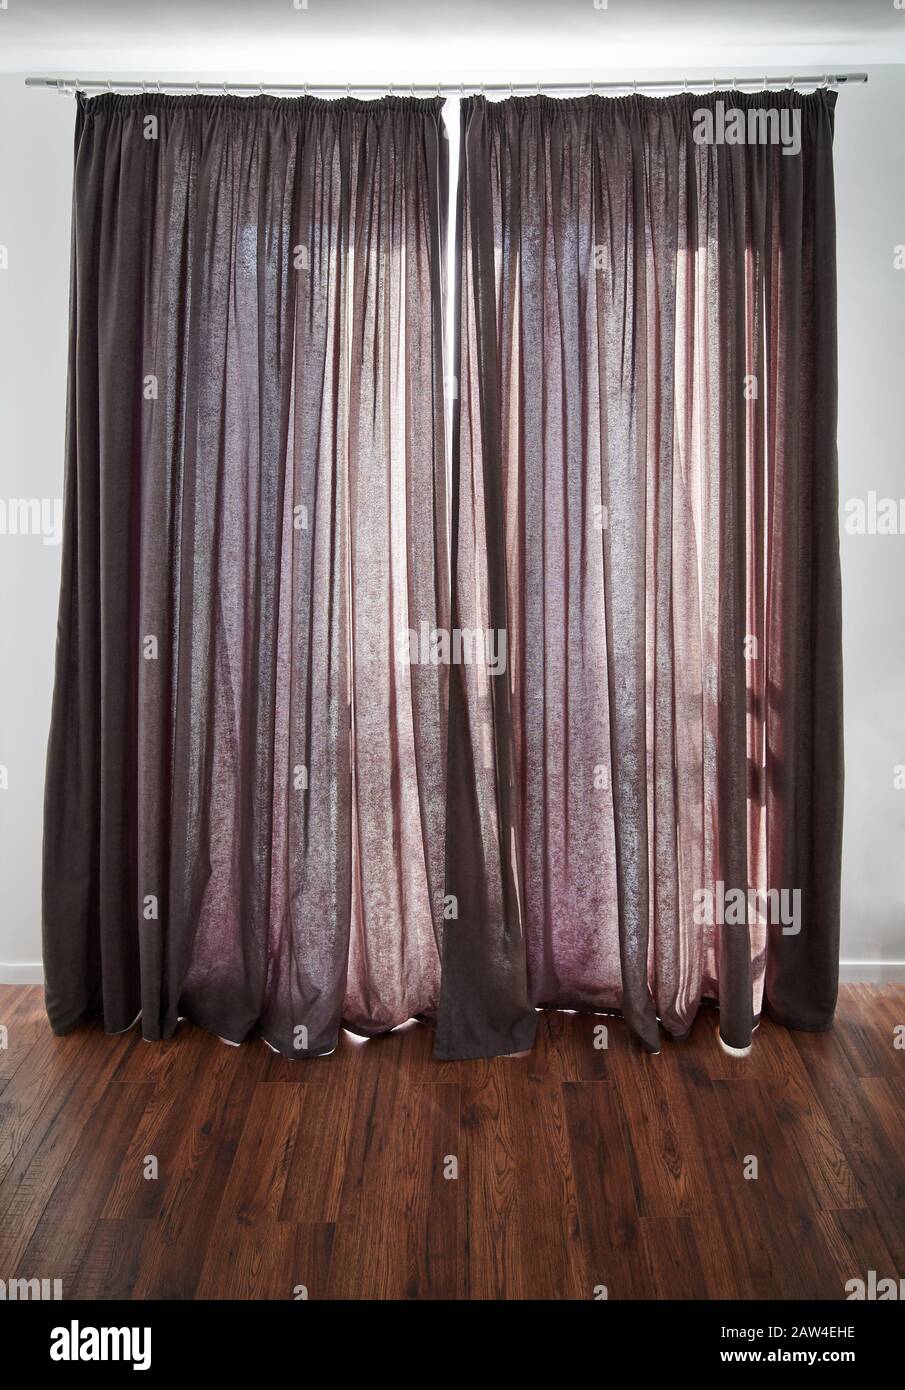 Closed dark curtain in modern apartment with wooden floor Stock Photo